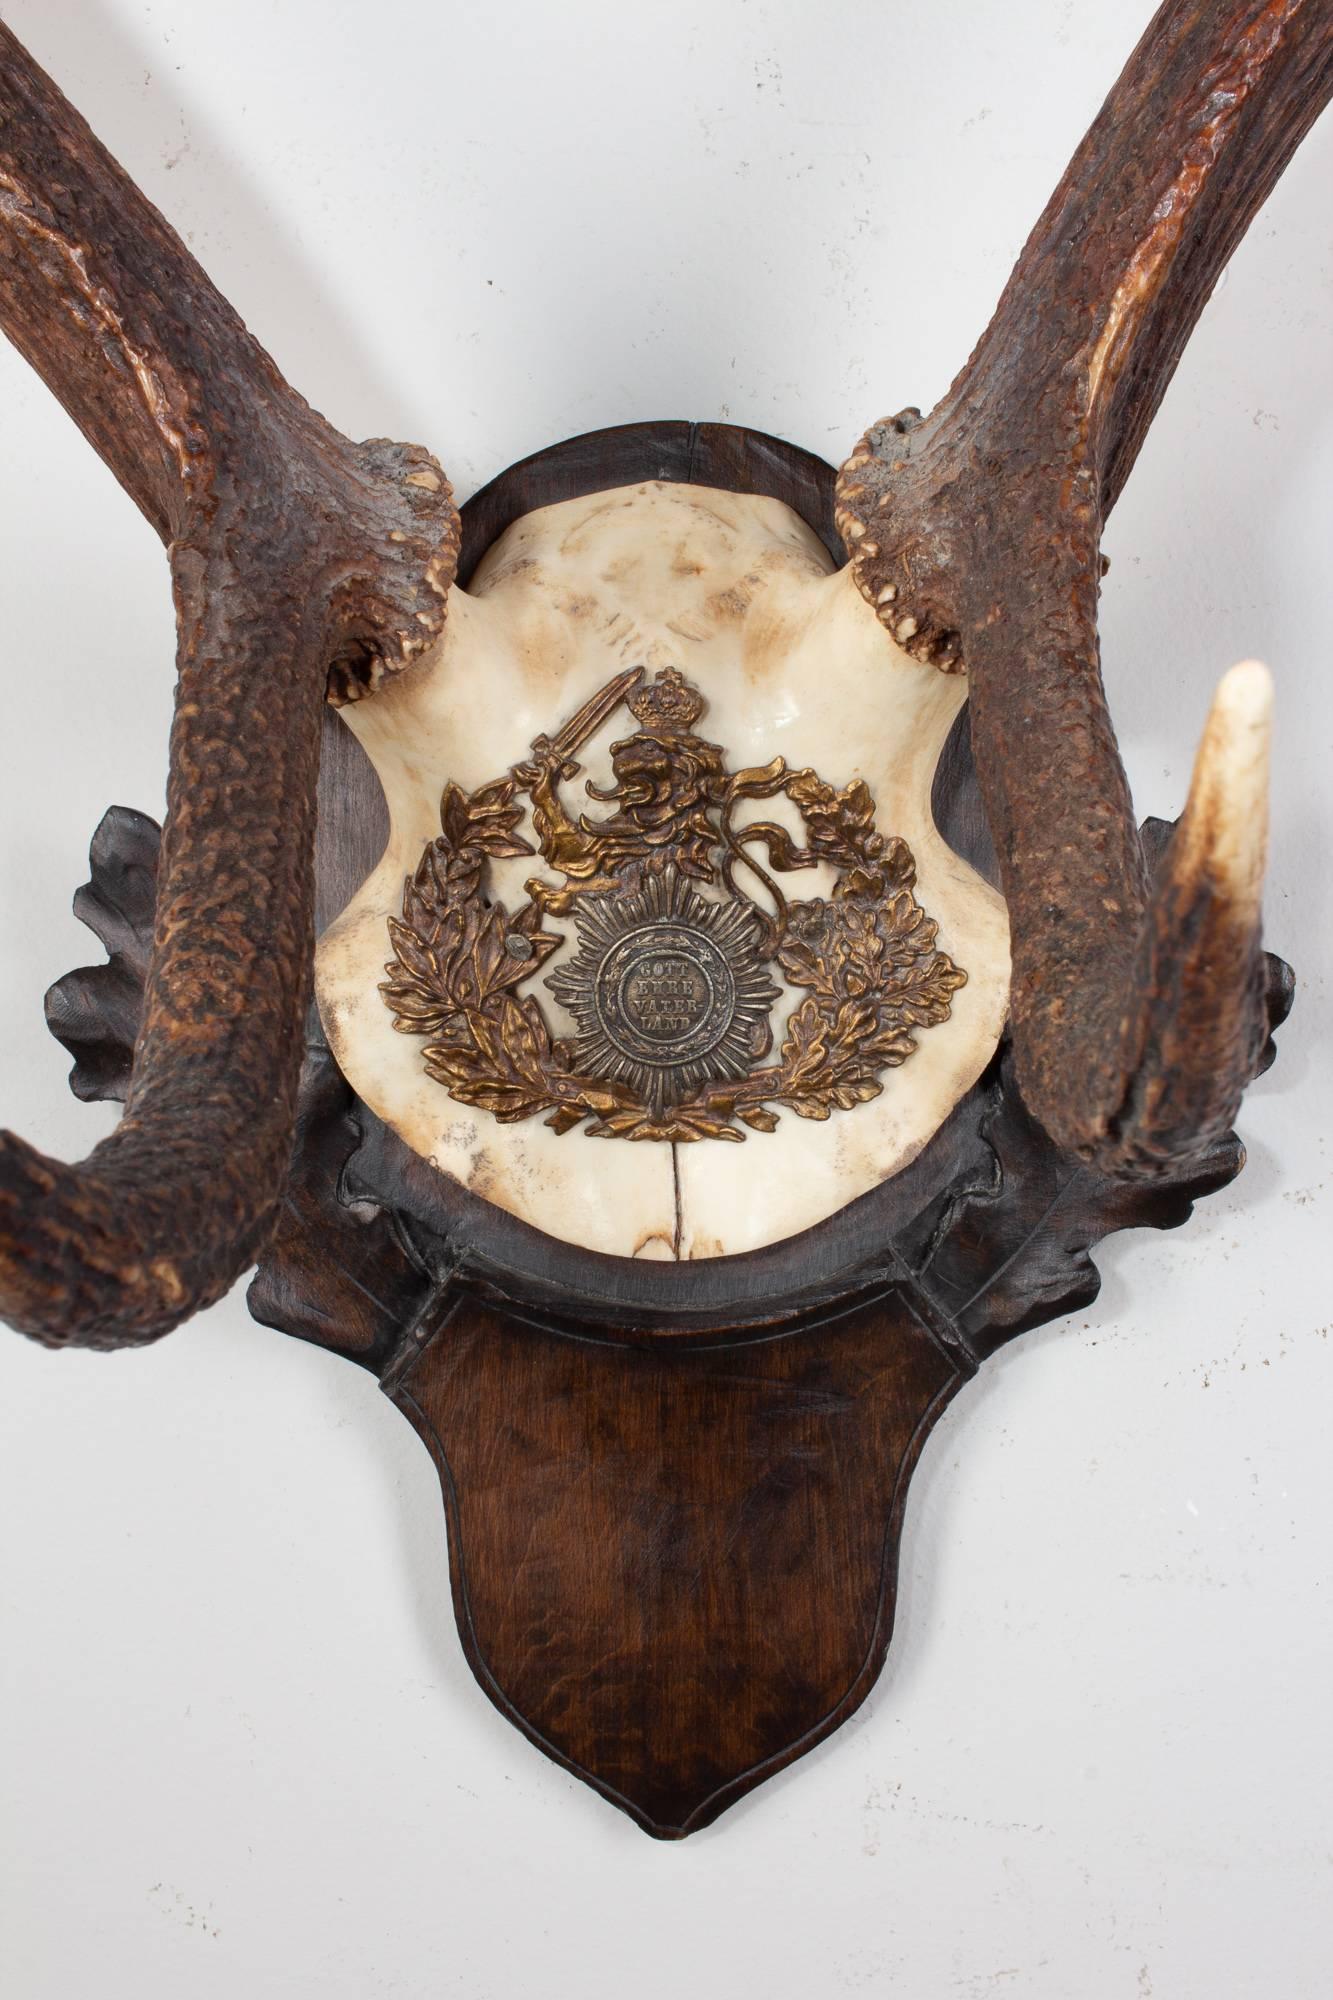 19th century Austrian fallow deer trophy on original Black Forest carved plaque that hung in Emperor Franz Josef's castle at Eckartsau in the Southern Austrian Alps. Eckartsau was a favourite hunting schloss of the Habsburg family. The plaque itself